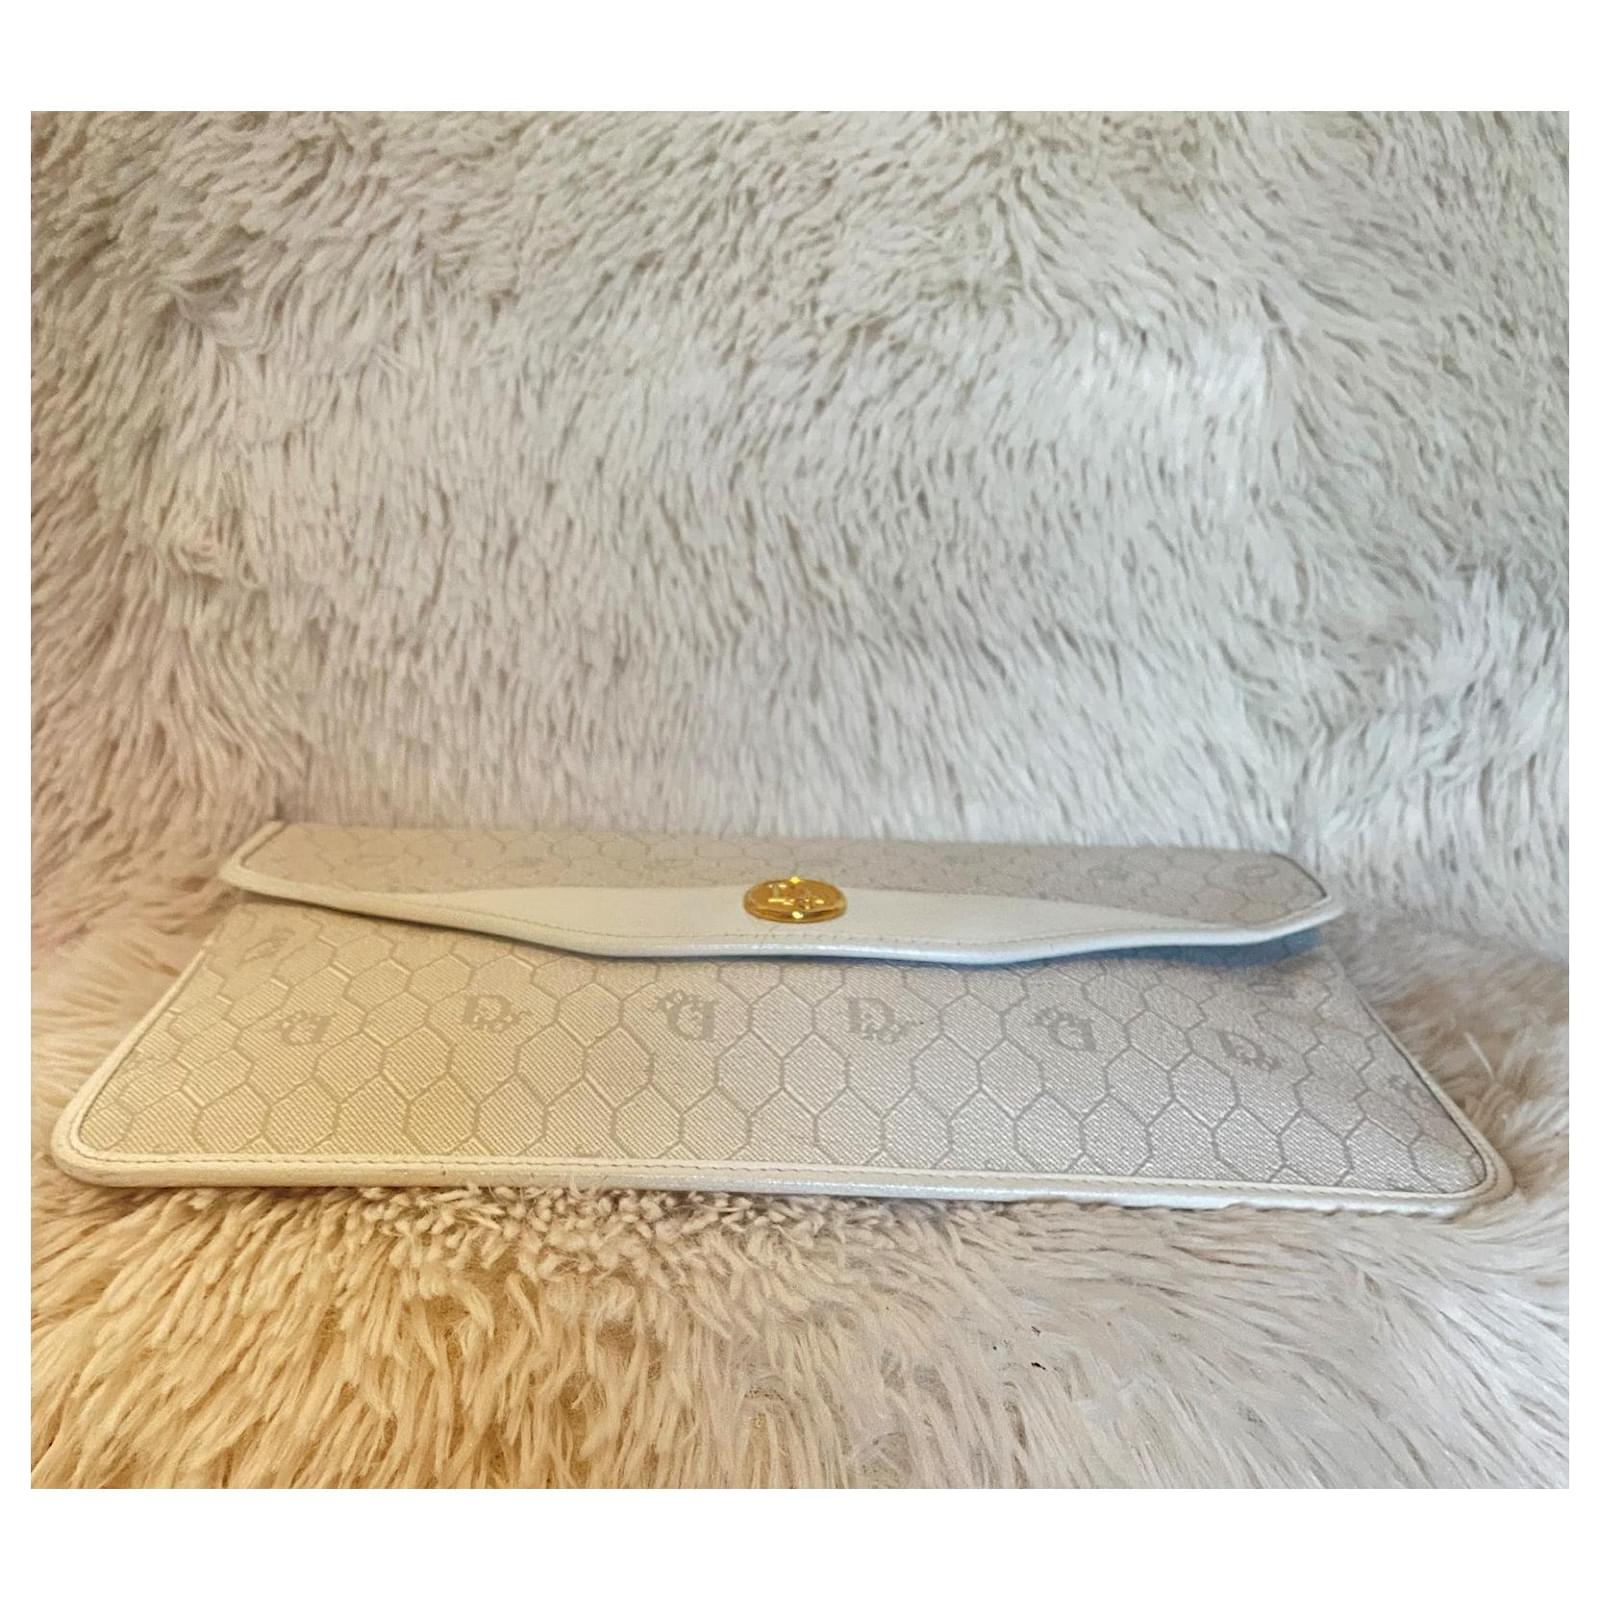 Dior White Clutch Bags  Handbags for Women  Authenticity Guaranteed  eBay